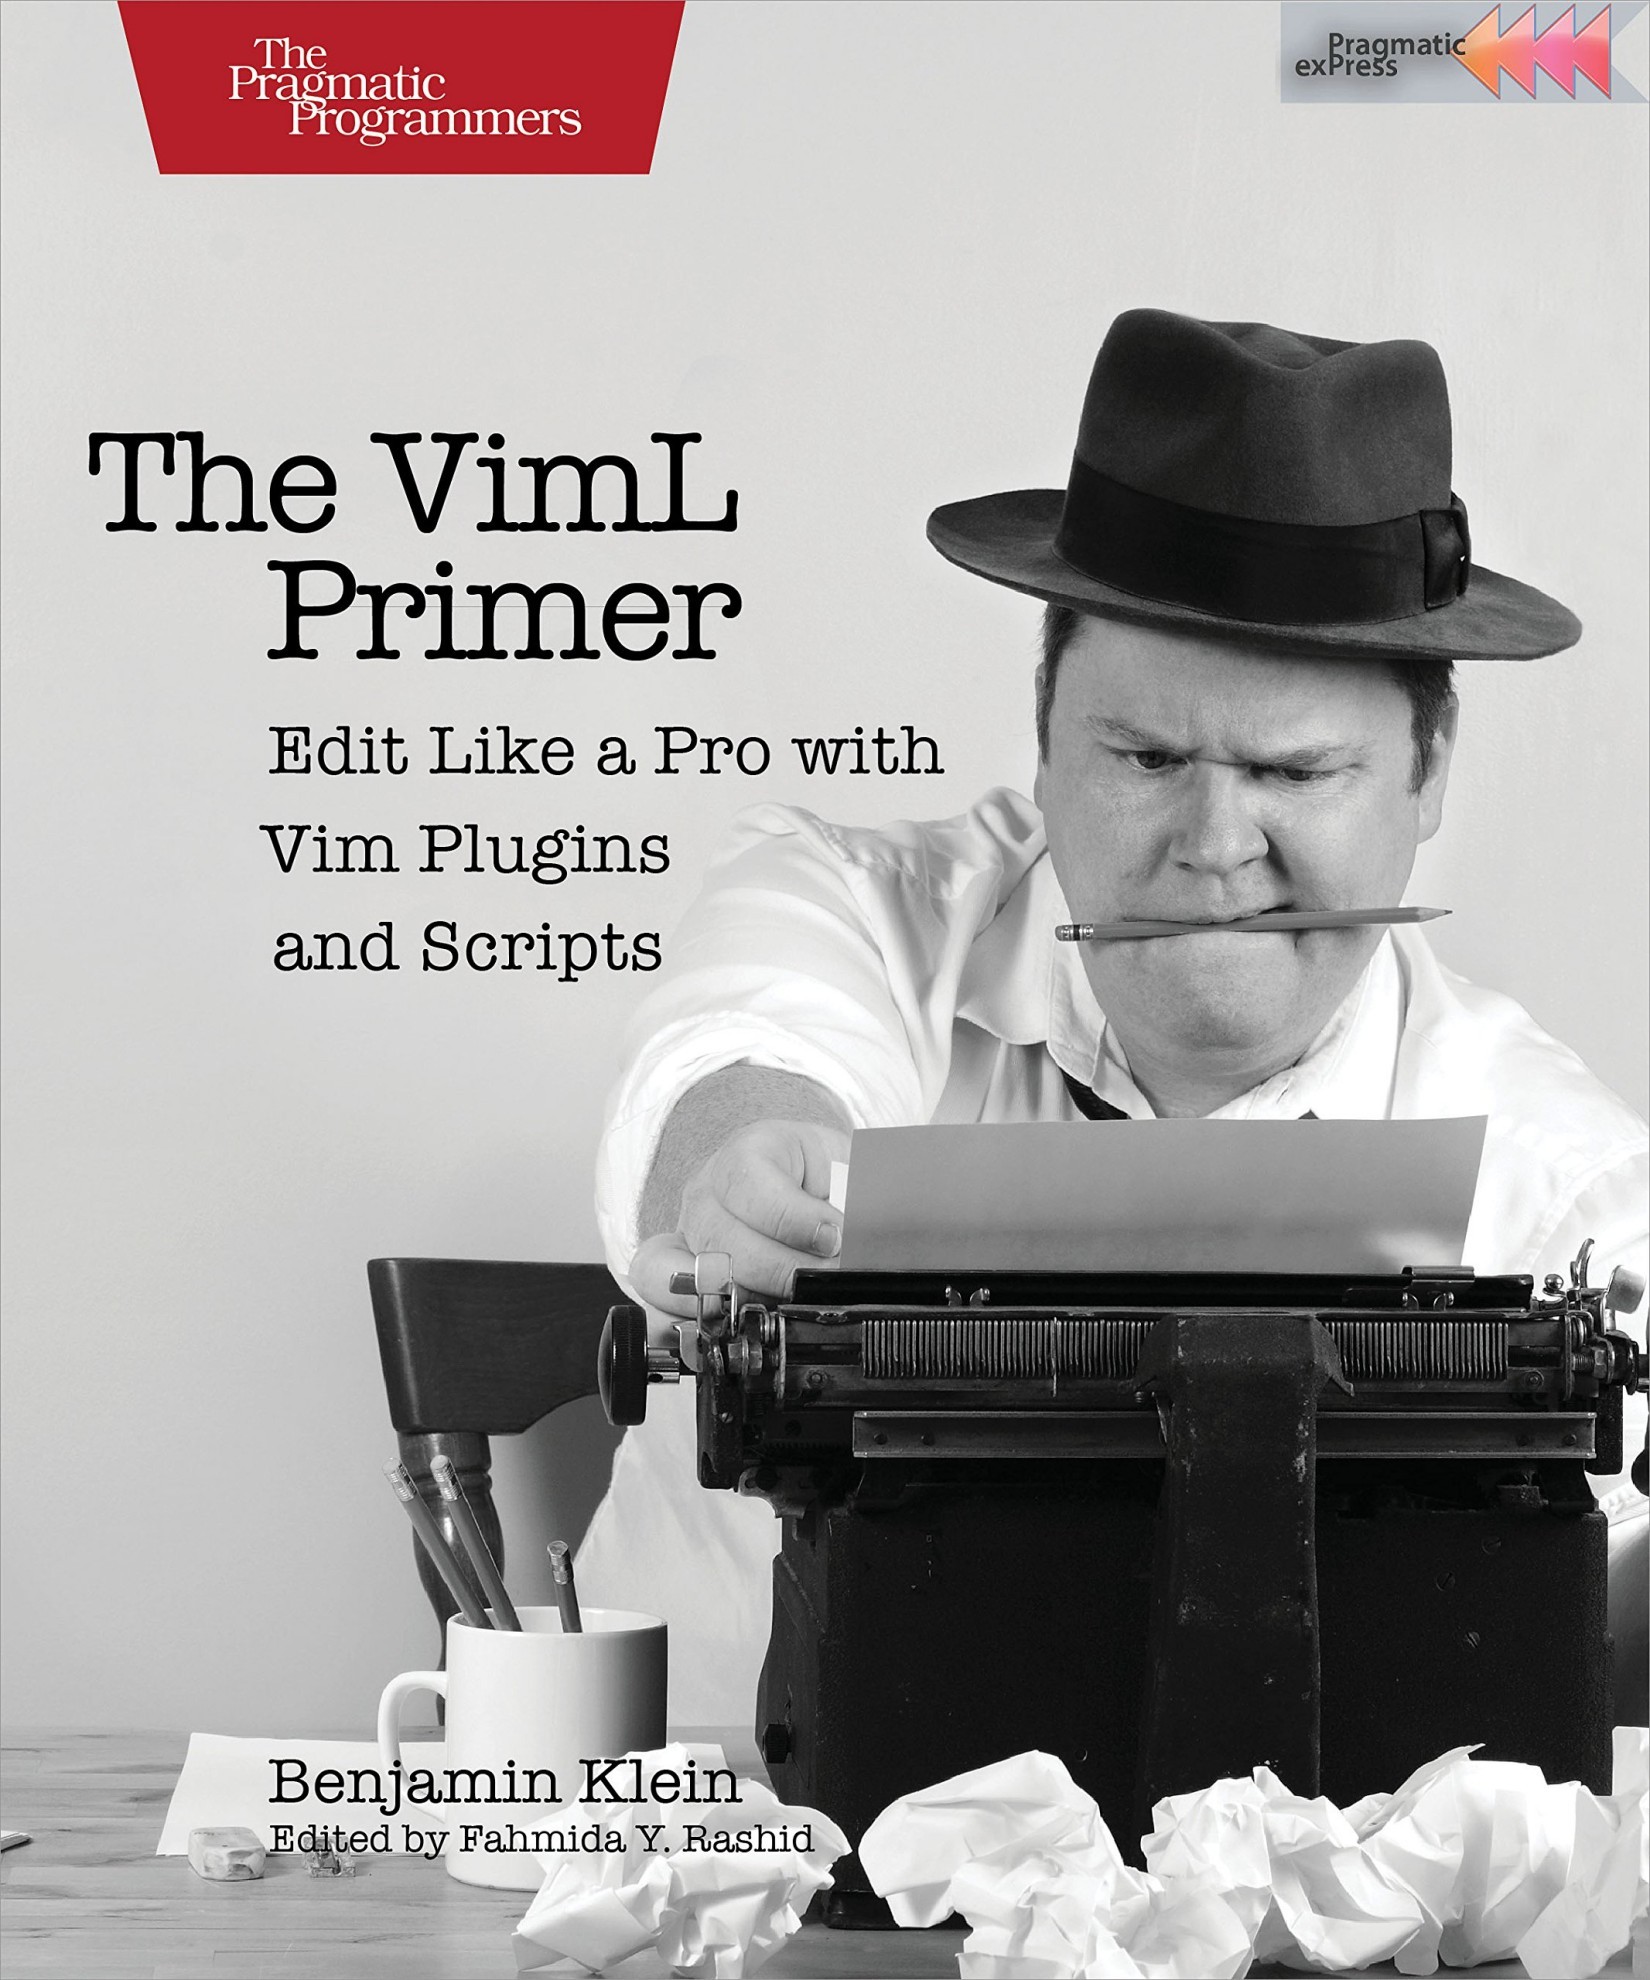 The VimL Primer: Edit Like a Pro With Vim Plugins and Scripts